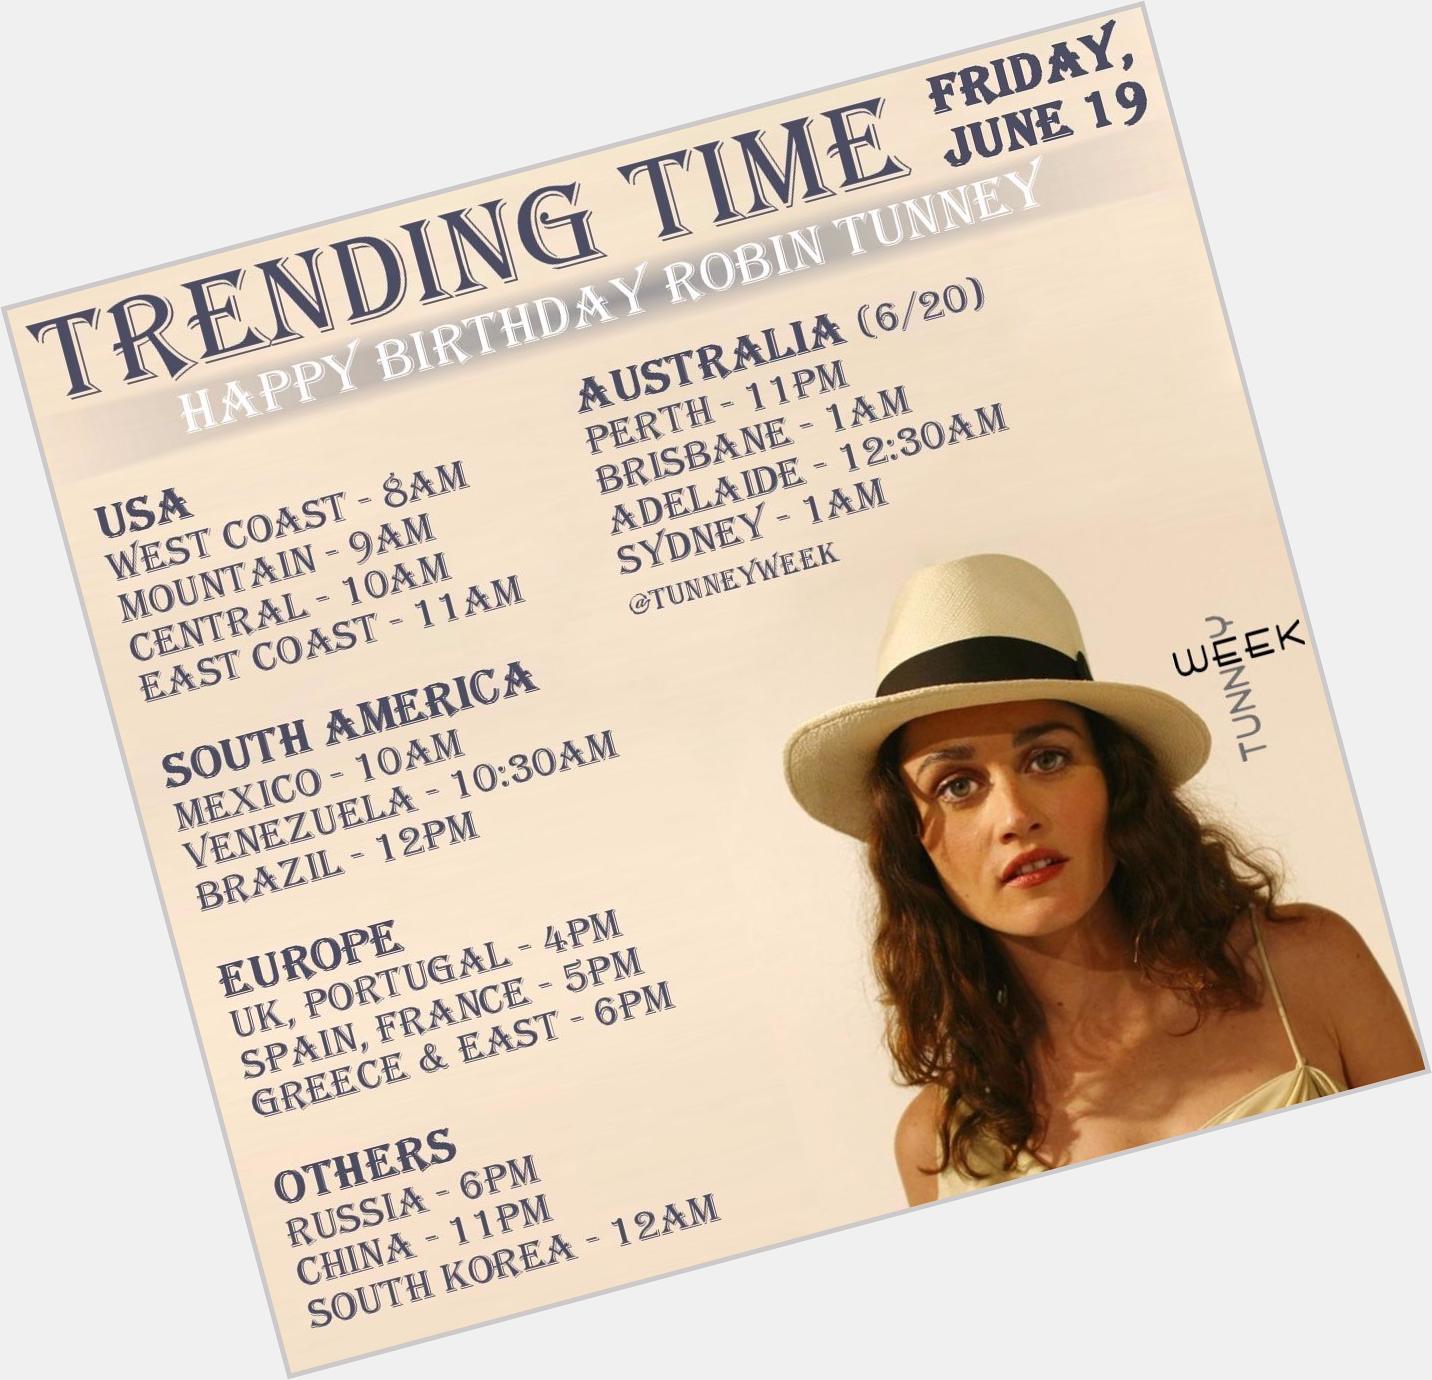 Thanks to all who voted! 
We\ll be trending Happy Birthday Robin Tunney from 11am - 12pm EST on this Friday, 6/19 :) 